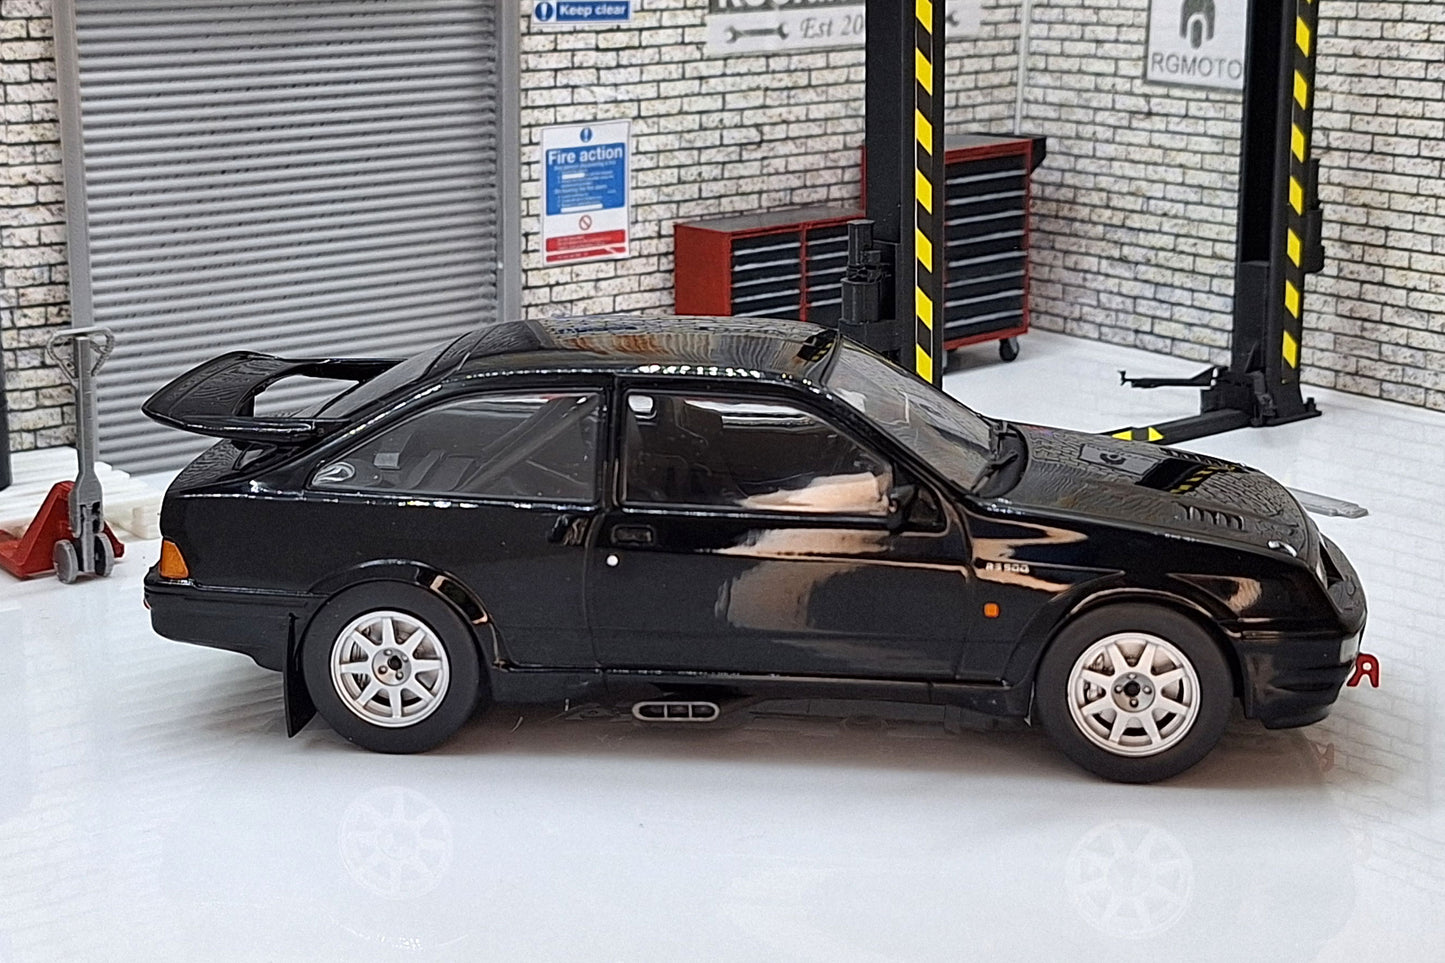 Ford Sierra RS Cosworth Black 1987 1:24 Scale Model